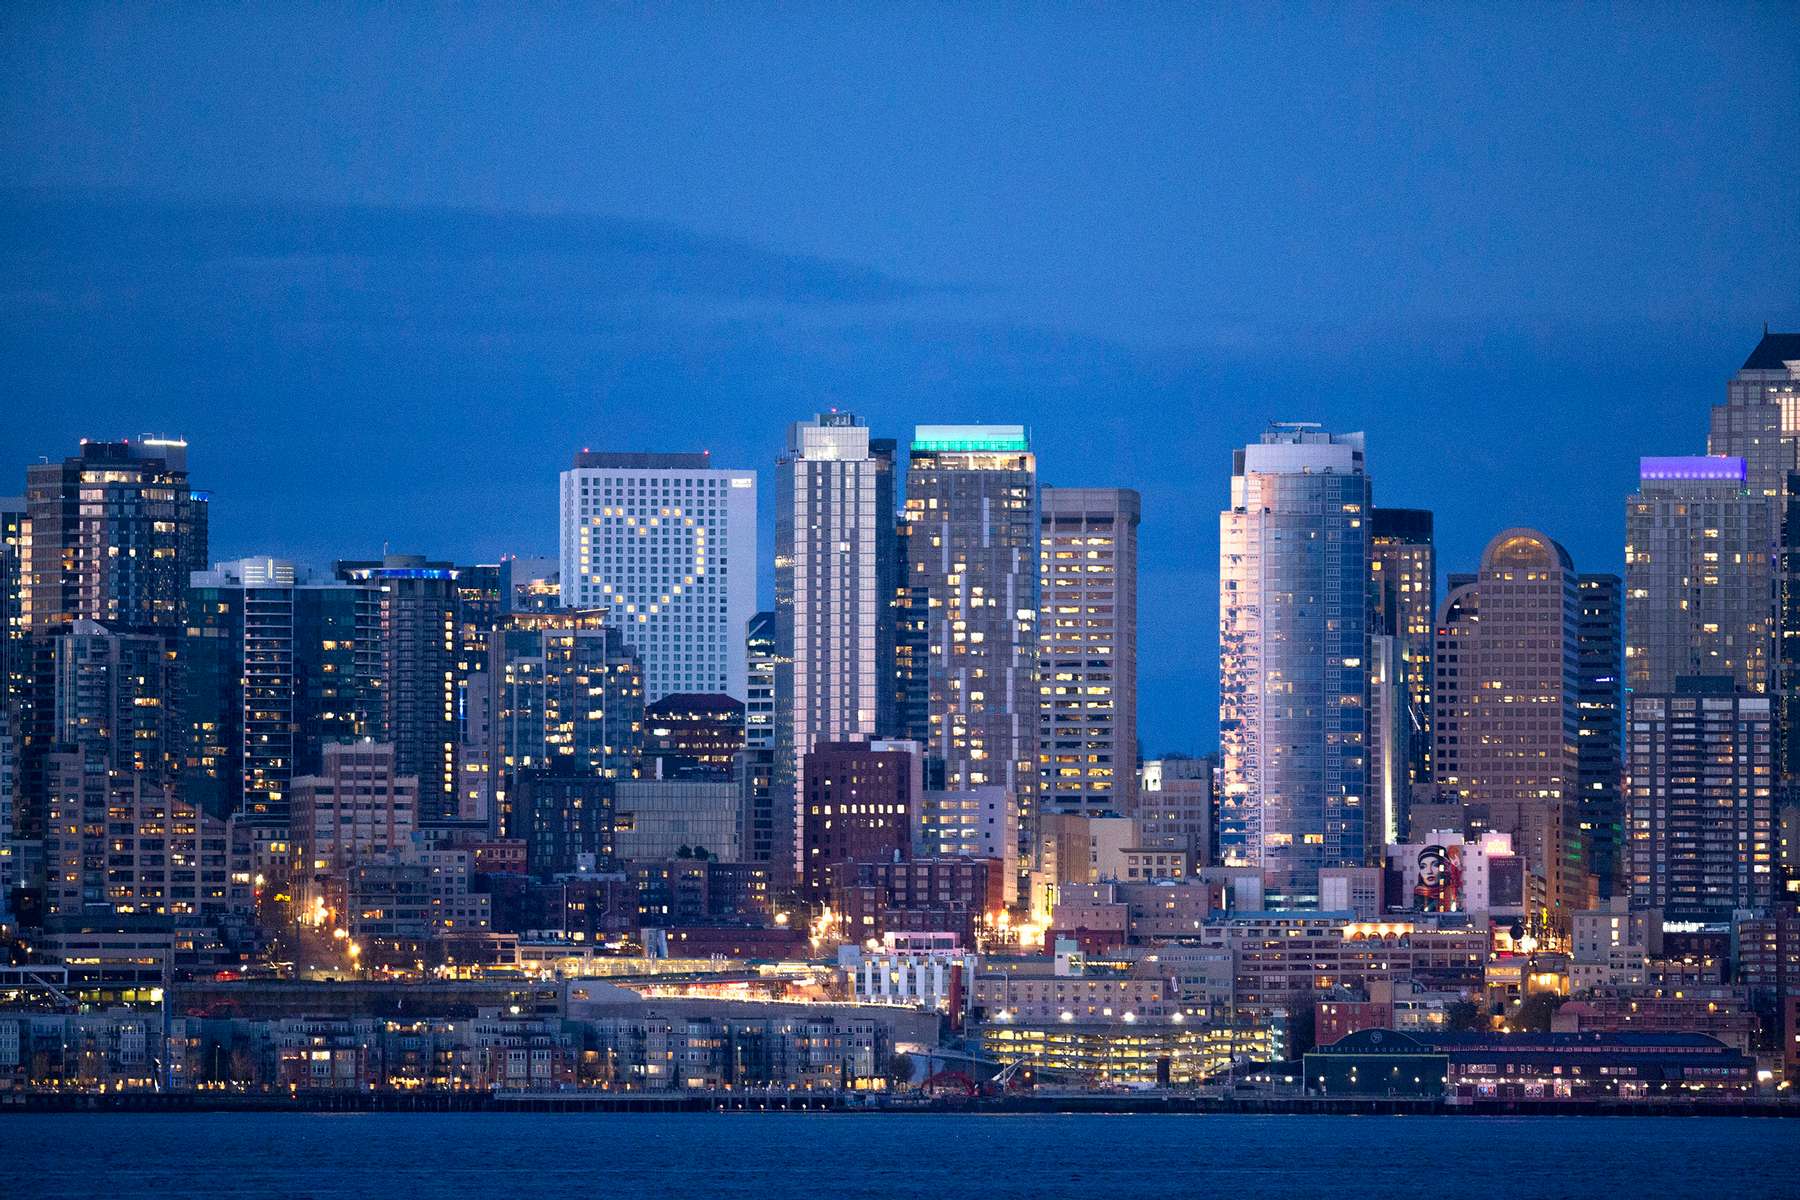 The Seattle skyline is seen at sunset on April 6, 2020 in Seattle, Washington. Windows of the Hyatt Regency Hotel are lit up in the shape of a heart. Washington State Governor Jay Inslee extended the Stay at Home order until May 4th to help slow the spread of coronavirus (COVID-19). (Photo by Karen Ducey/Getty Images)